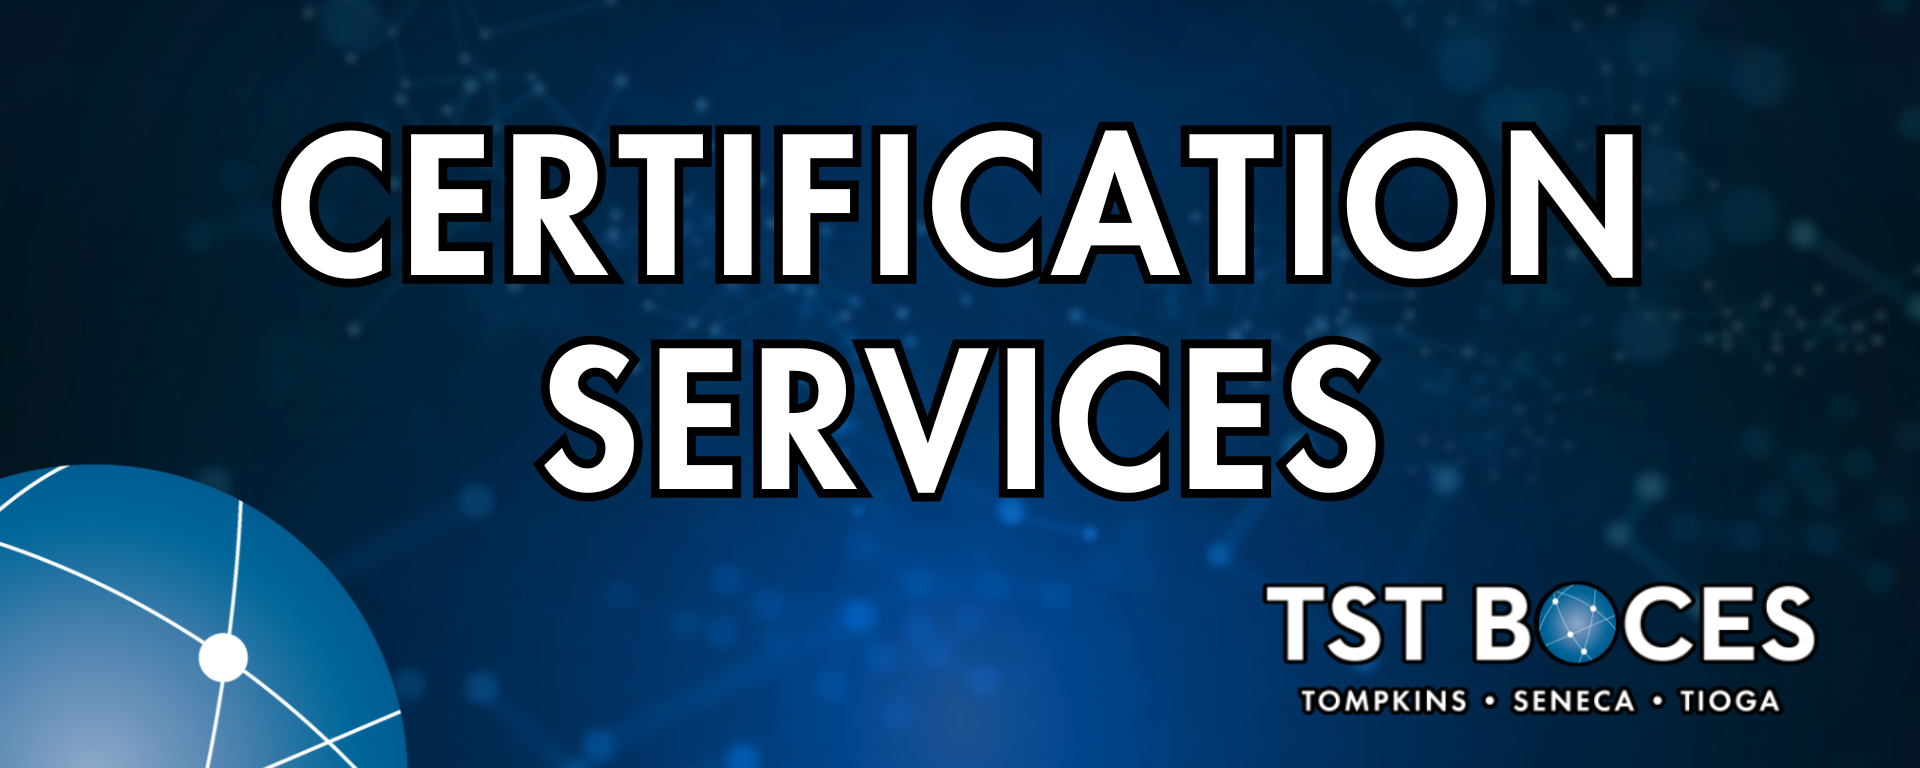 Certification Services Banner